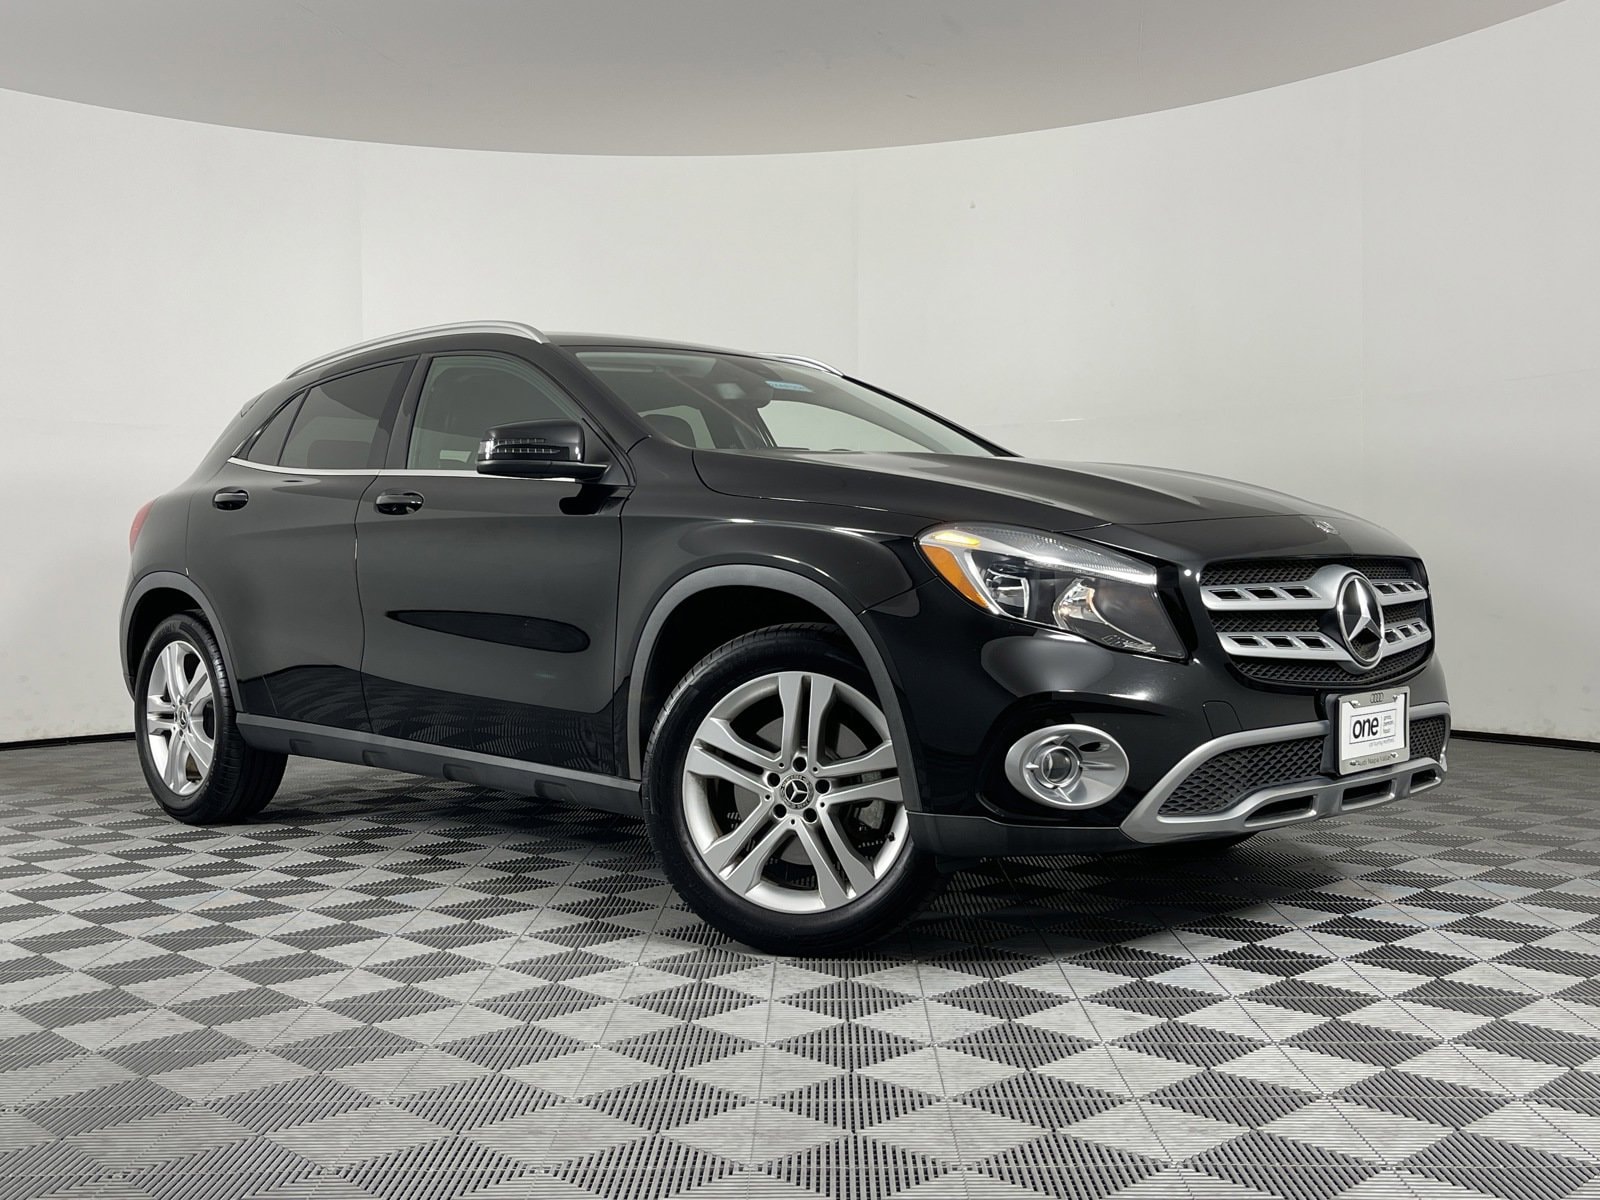 Used 2019 Mercedes-Benz GLA-Class GLA250 with VIN WDCTG4GB5KJ600656 for sale in Fairfield, CA